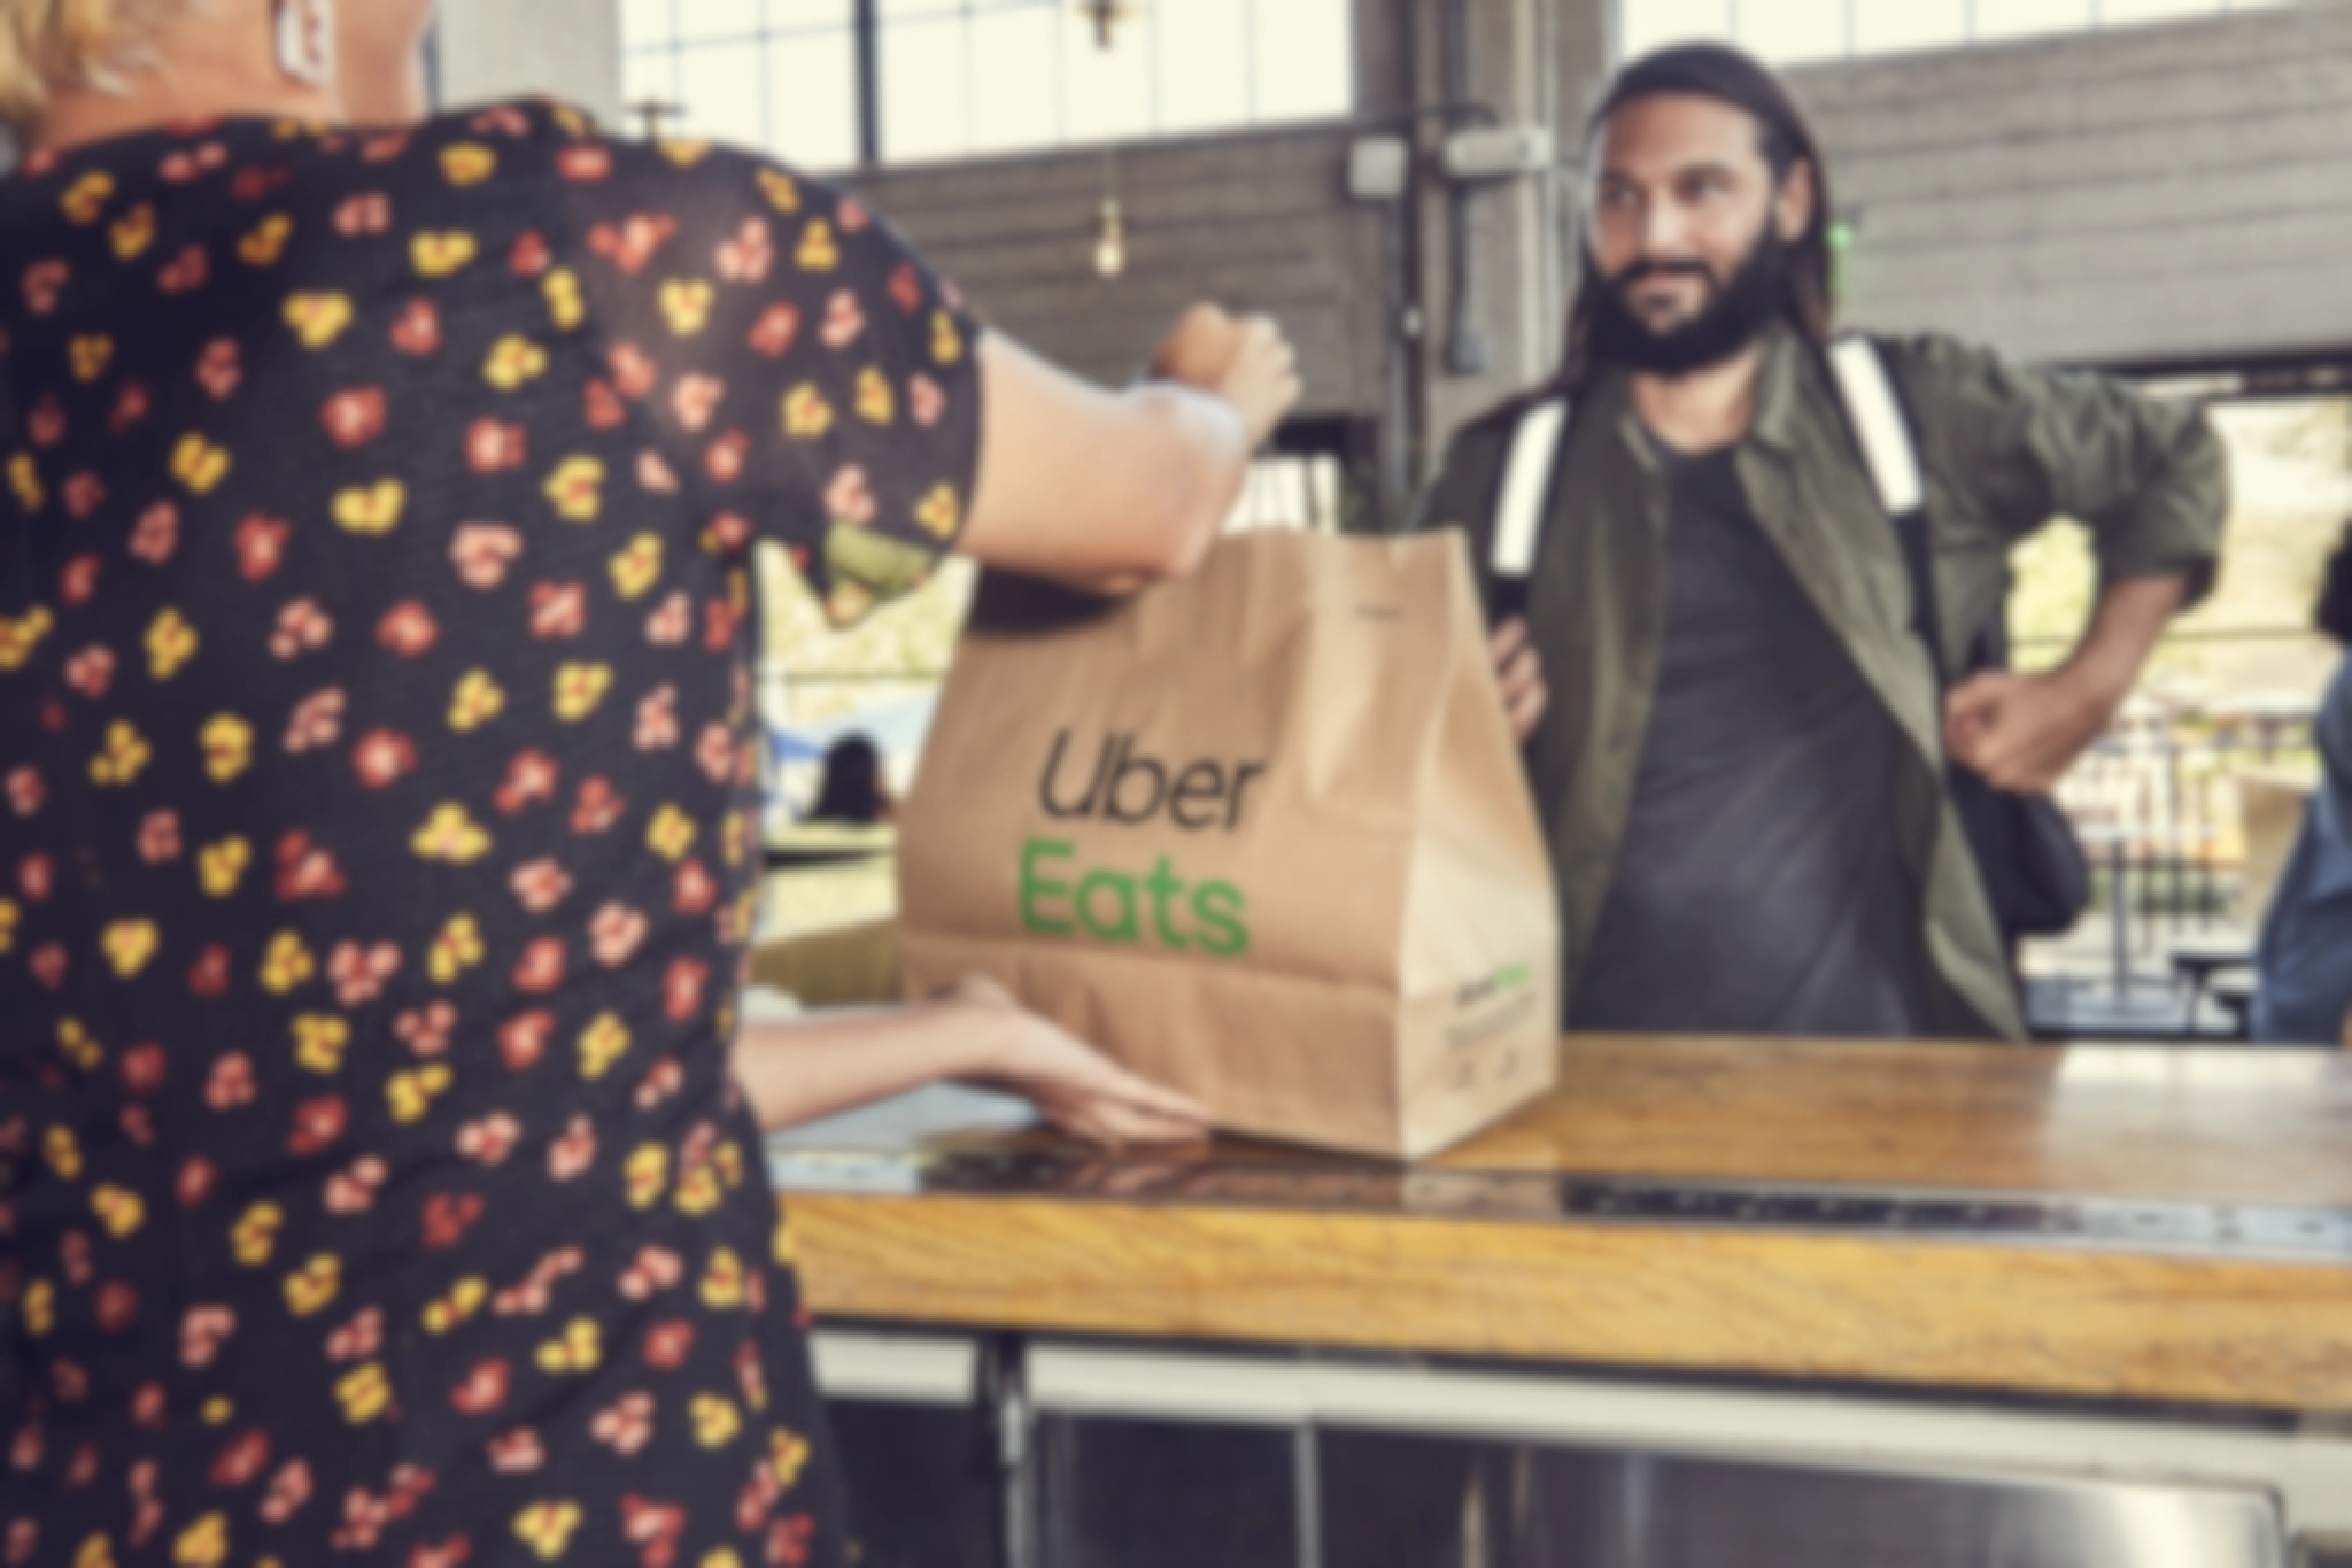 an Uber Eats delivery person picking up an order from a restaurant